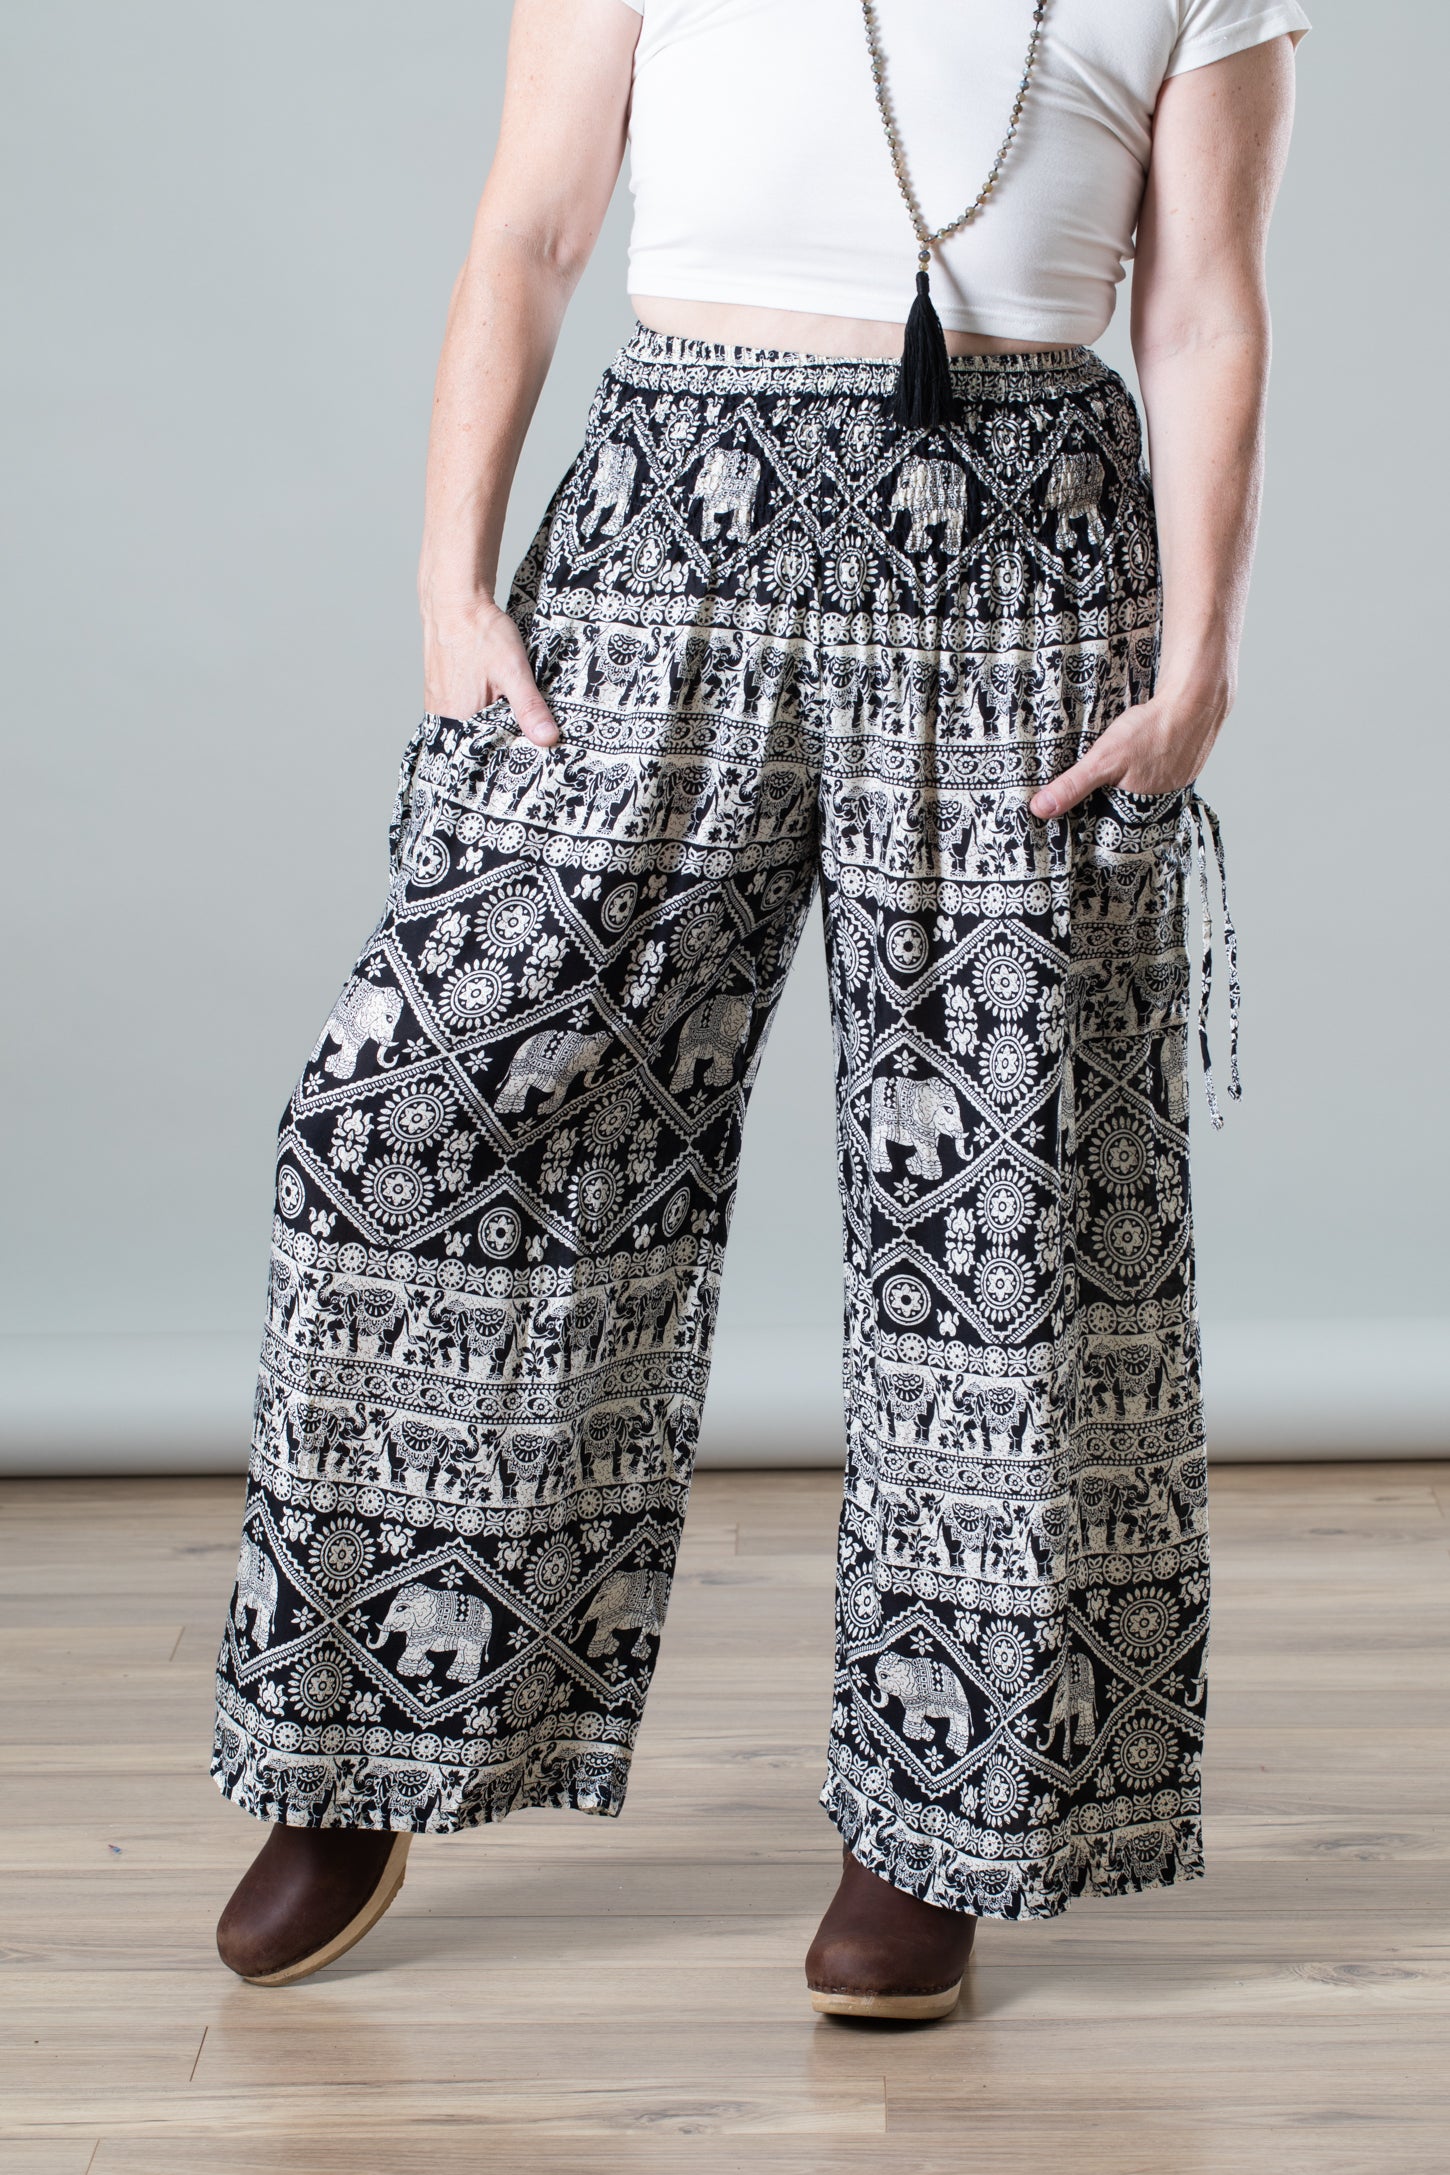 Ethnic Elephant and Floral Printed Wide Leg Palazzo Pants Trouser, Waist  Size: 32.0 at Rs 250 in Jaipur